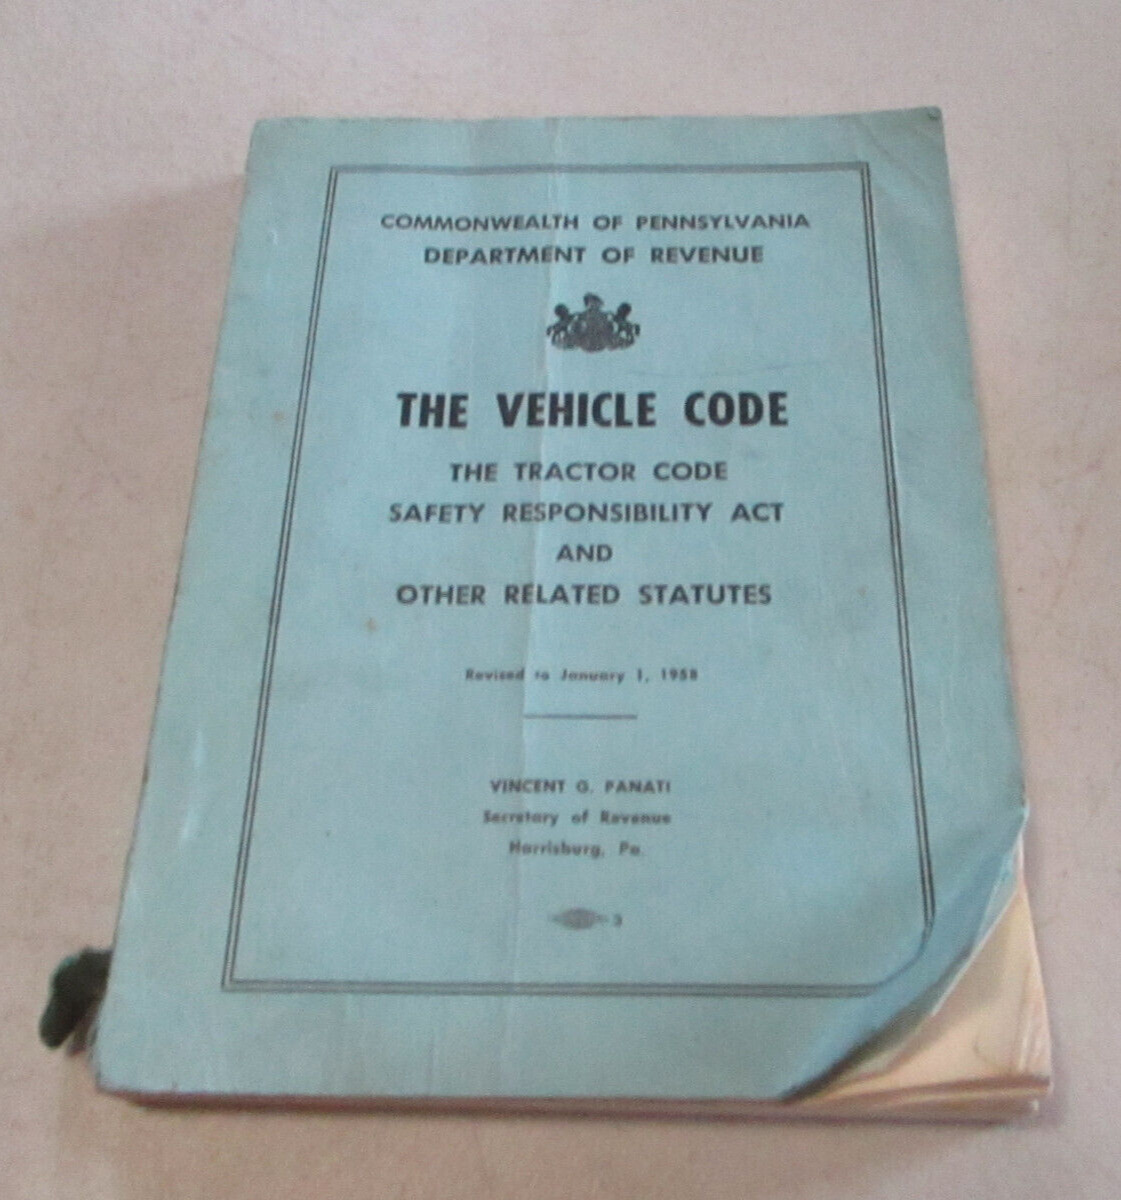 Commonwealth of Pennsylvania The Vehicle Code - Driving Rules Regulations  1958